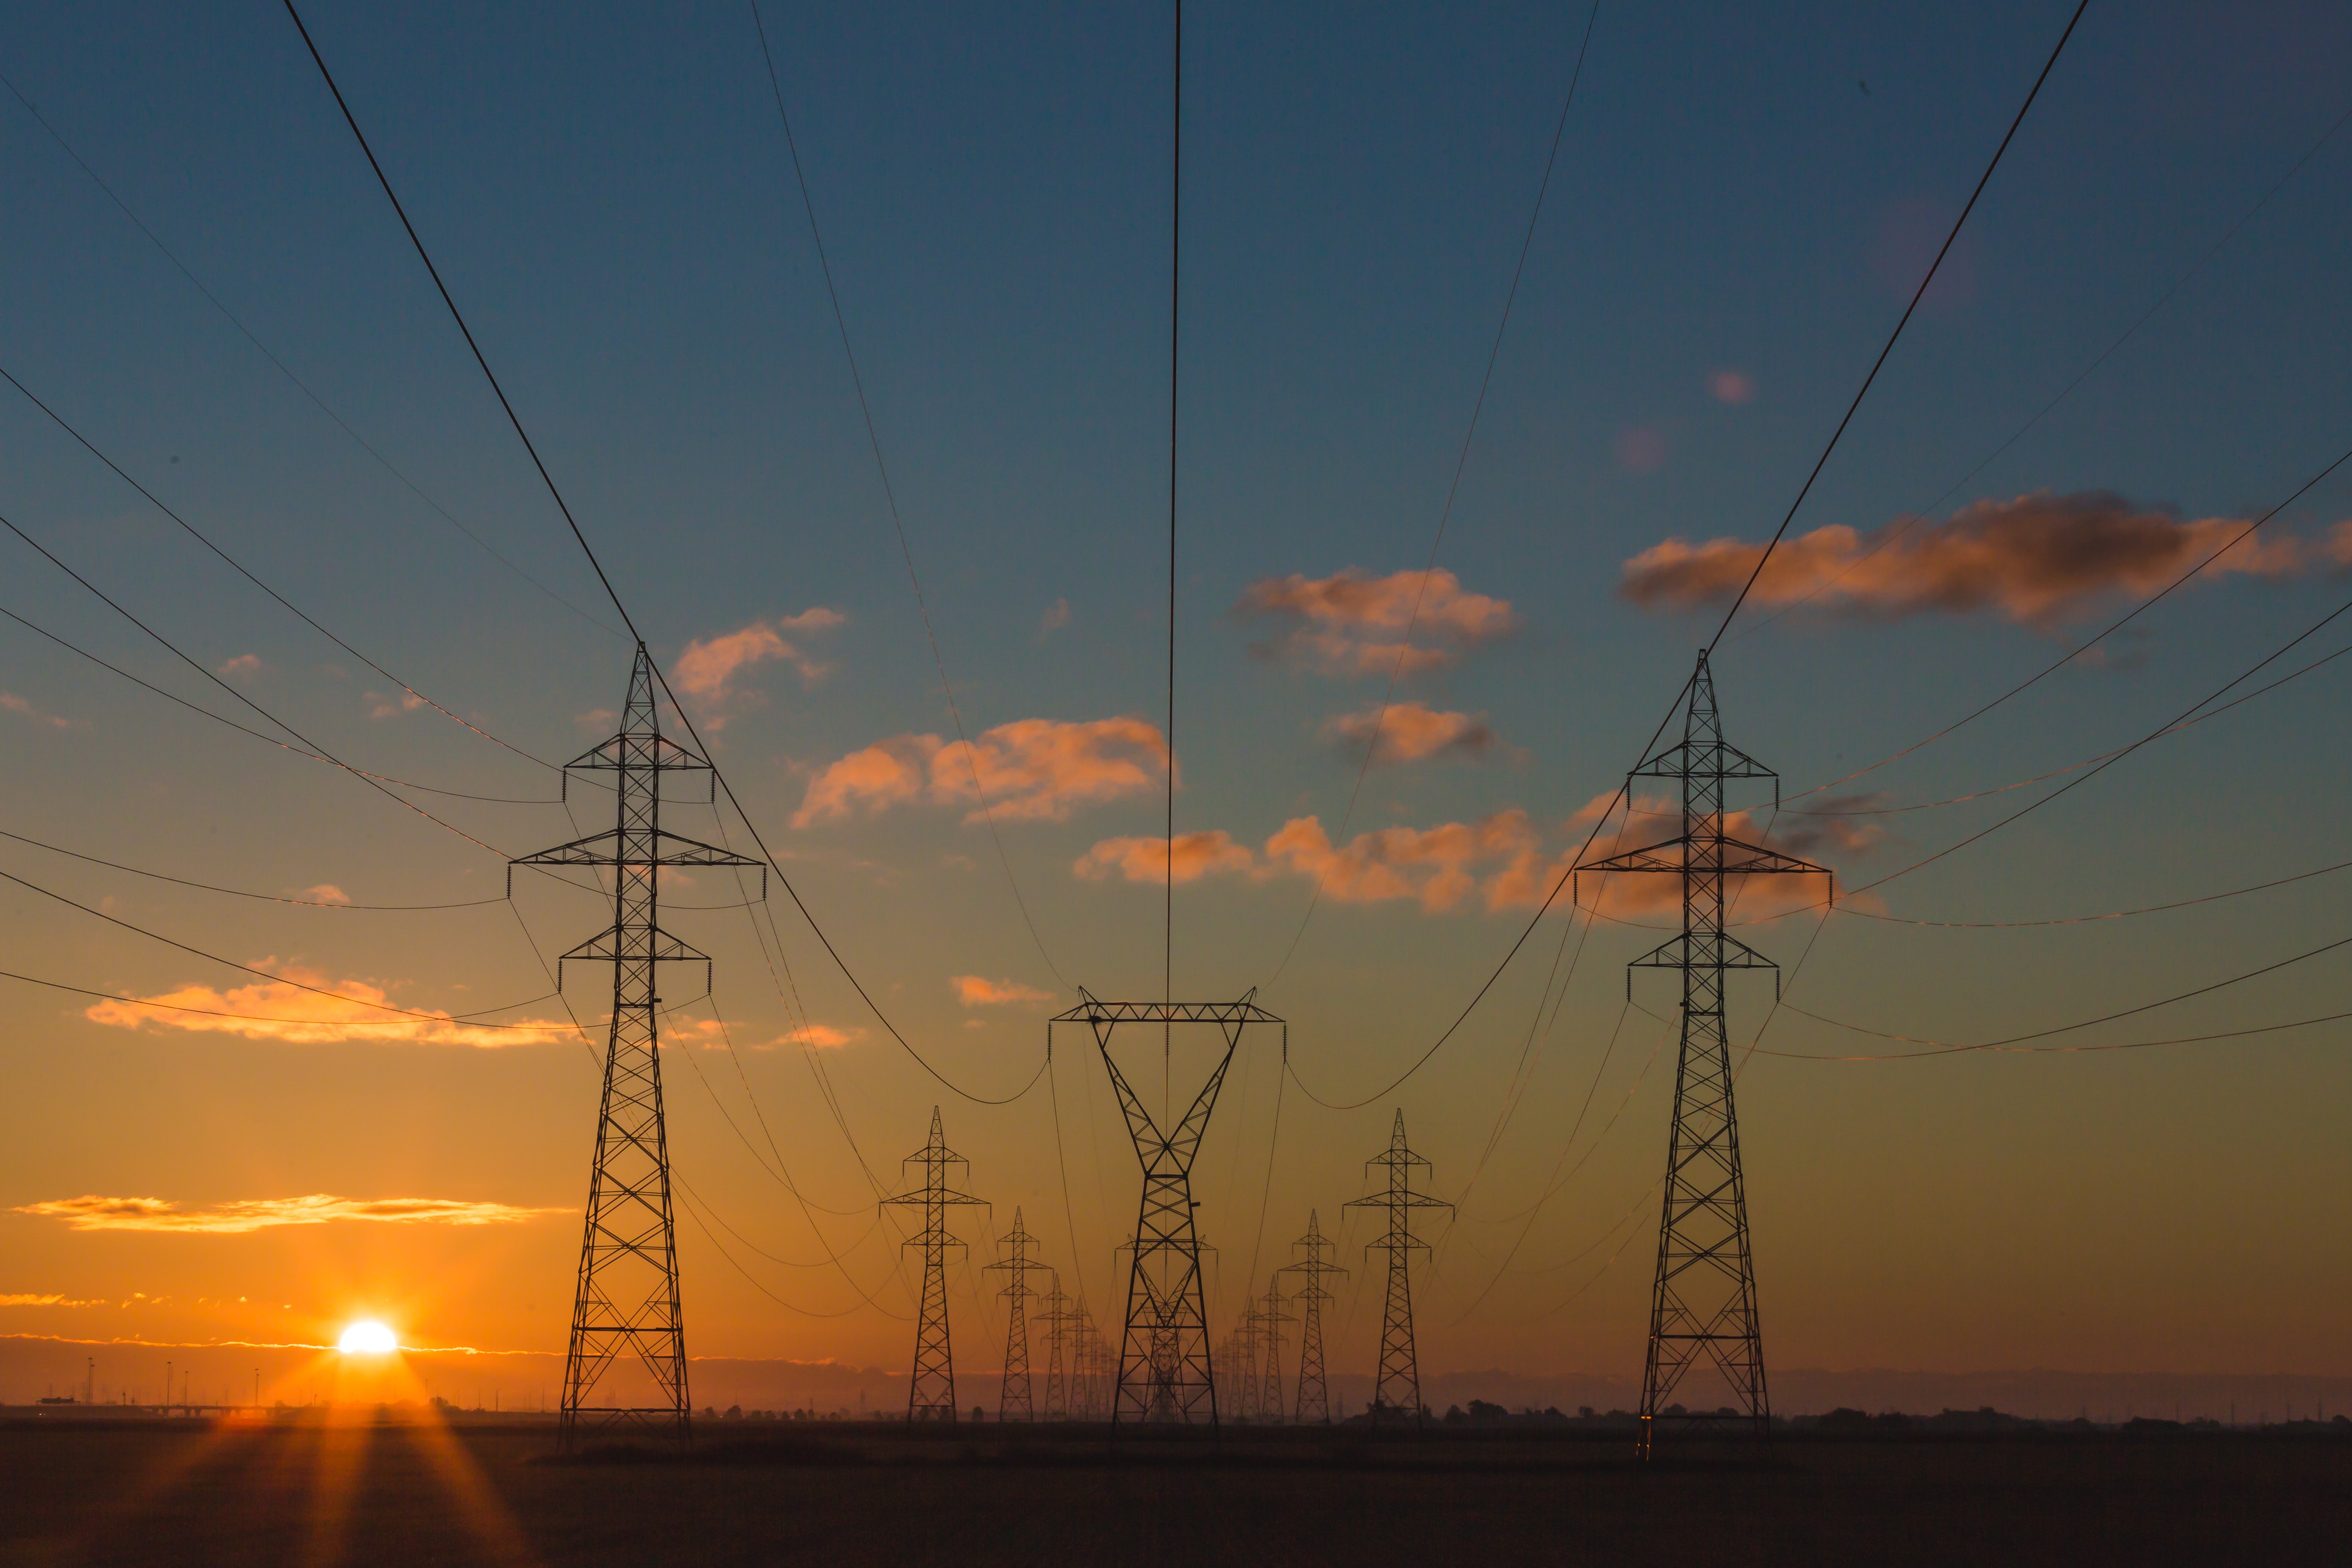 image showing electricity pylons at sunset